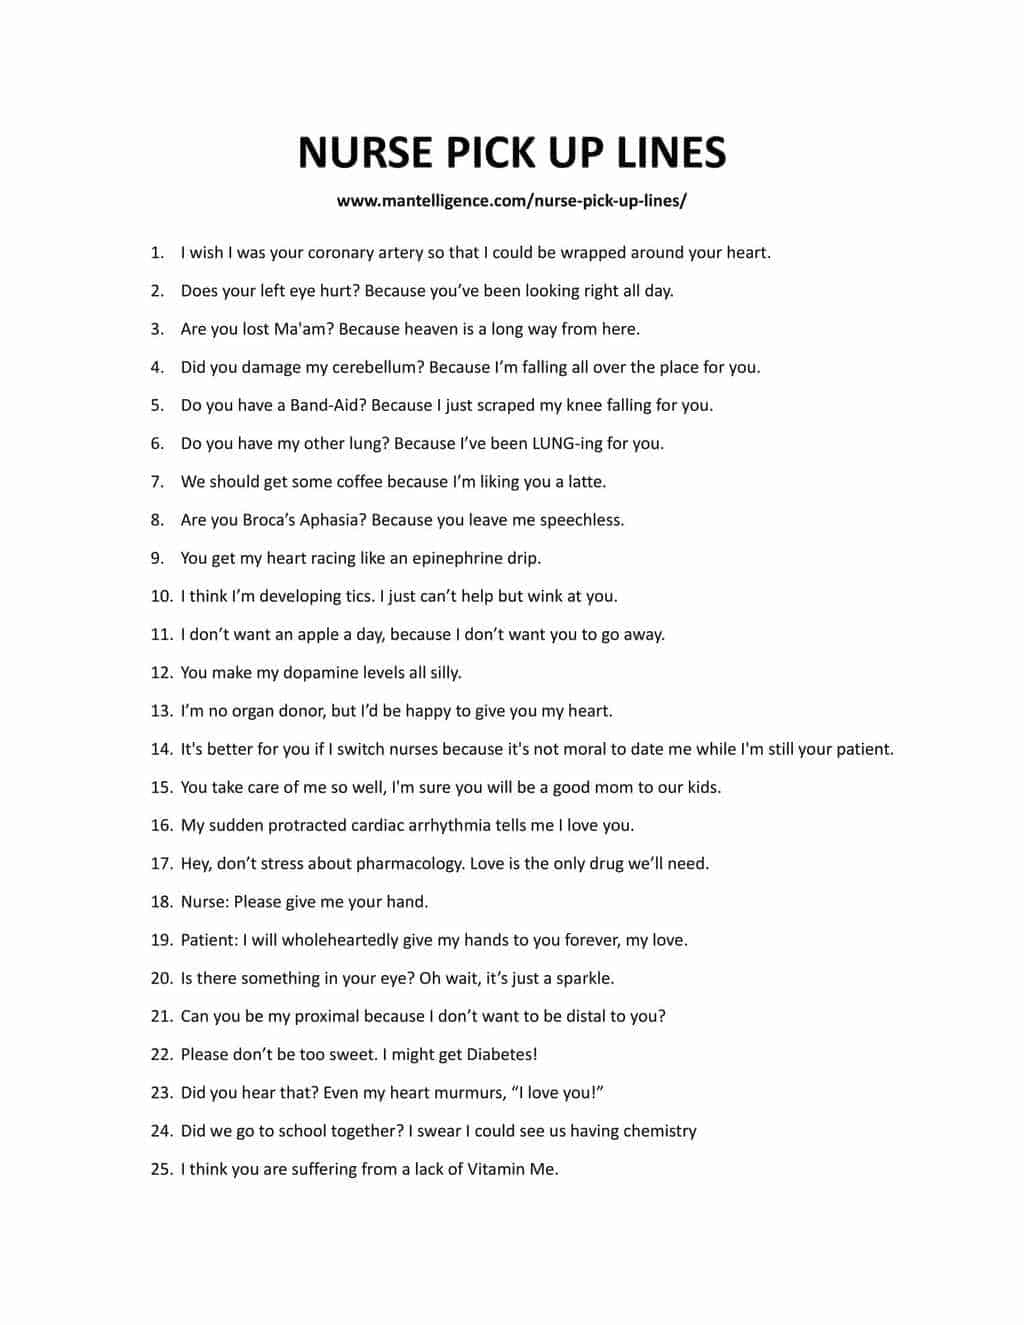 Downloadable list of Lines